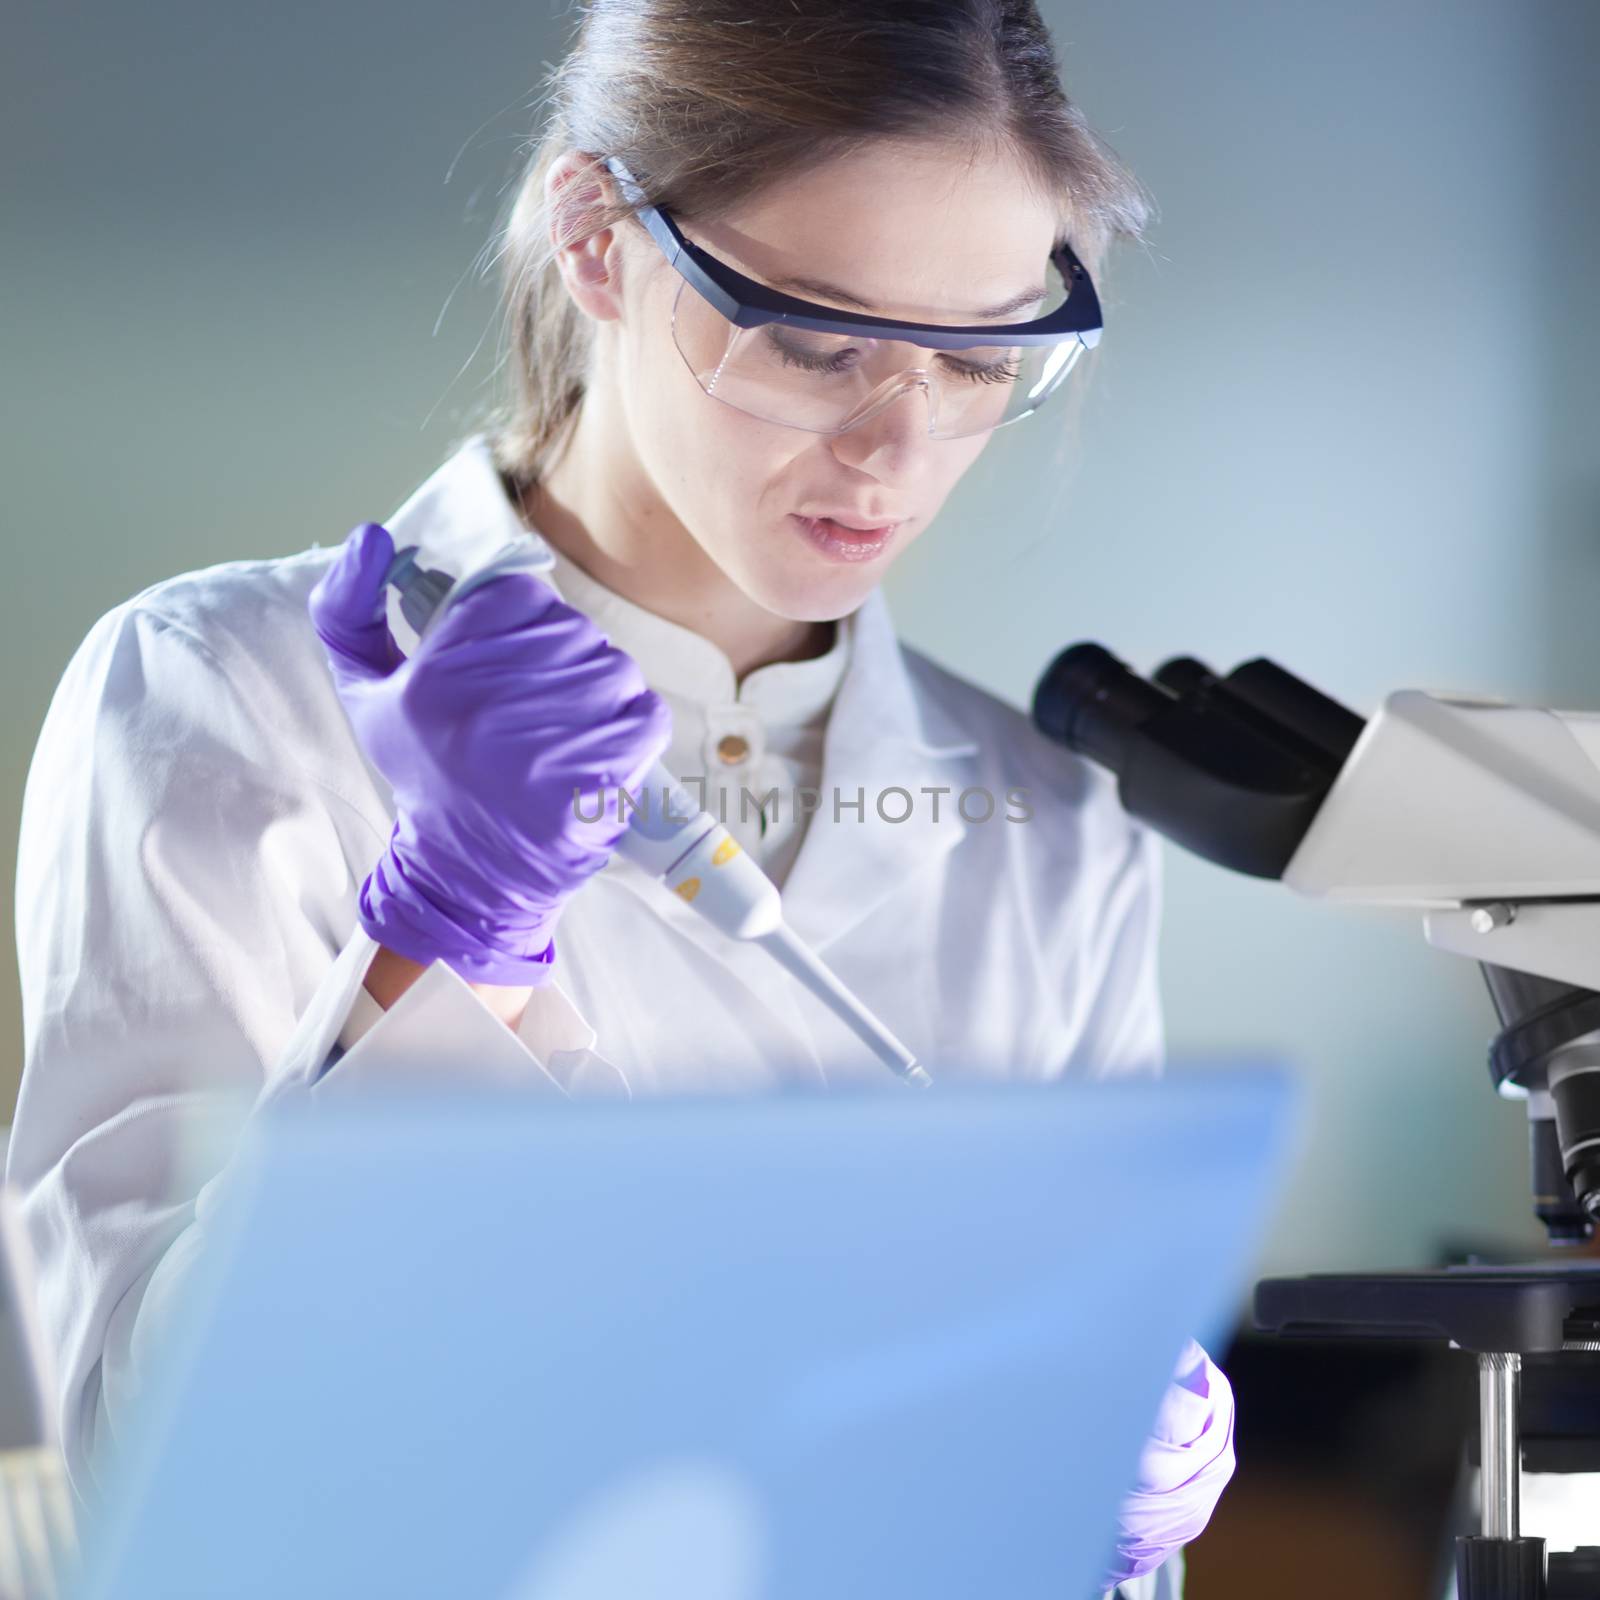 Life scientist researching in laboratory. Portrait of attractive, young, confident female health care professional pipetting under microscope in hes working environment. Healthcare and biotechnology.